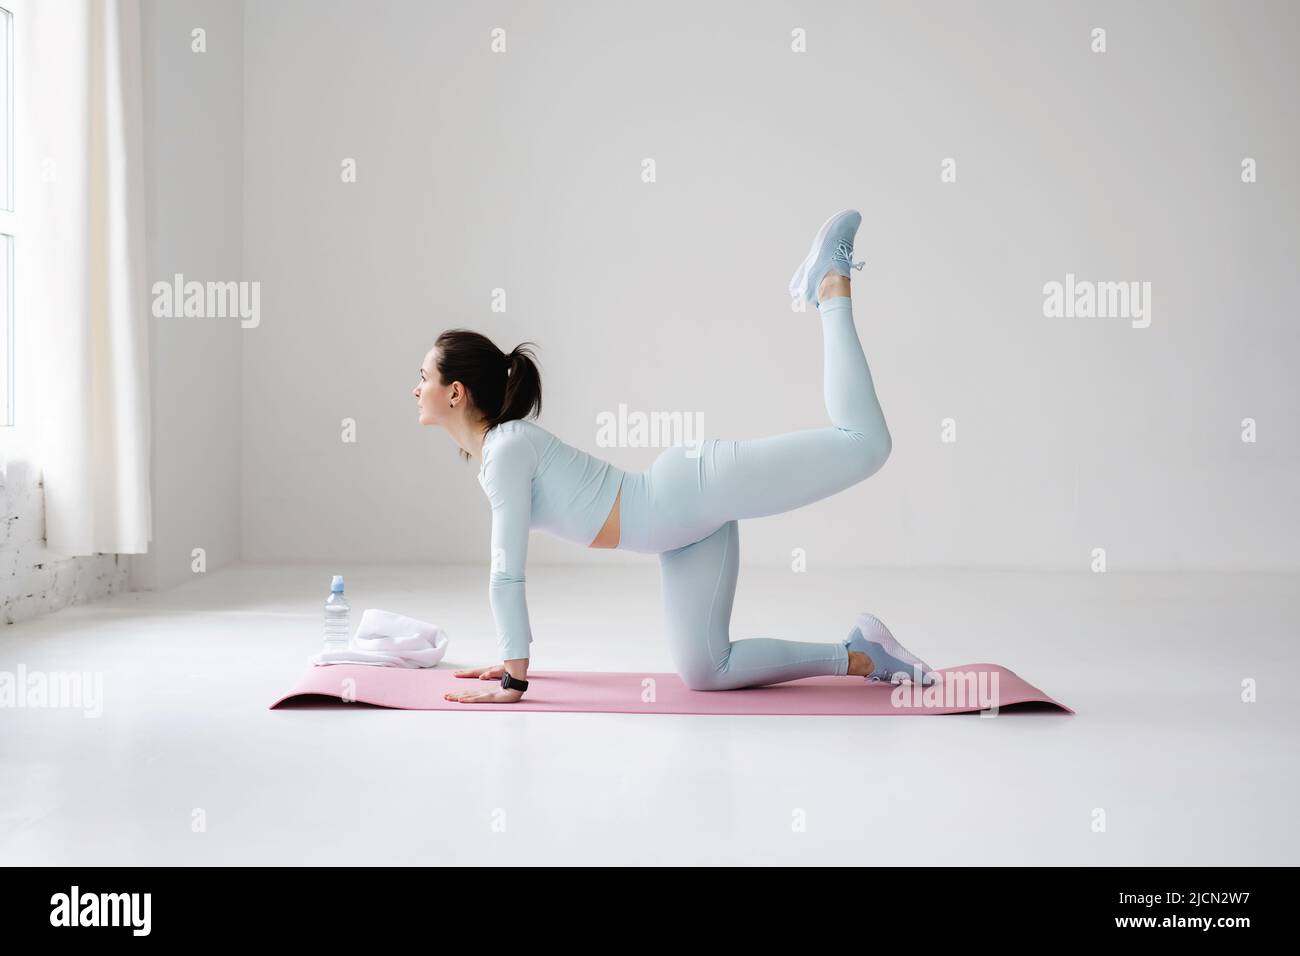 Young fit woman doing leg exercises on fitness mat indoors. Stock Photo